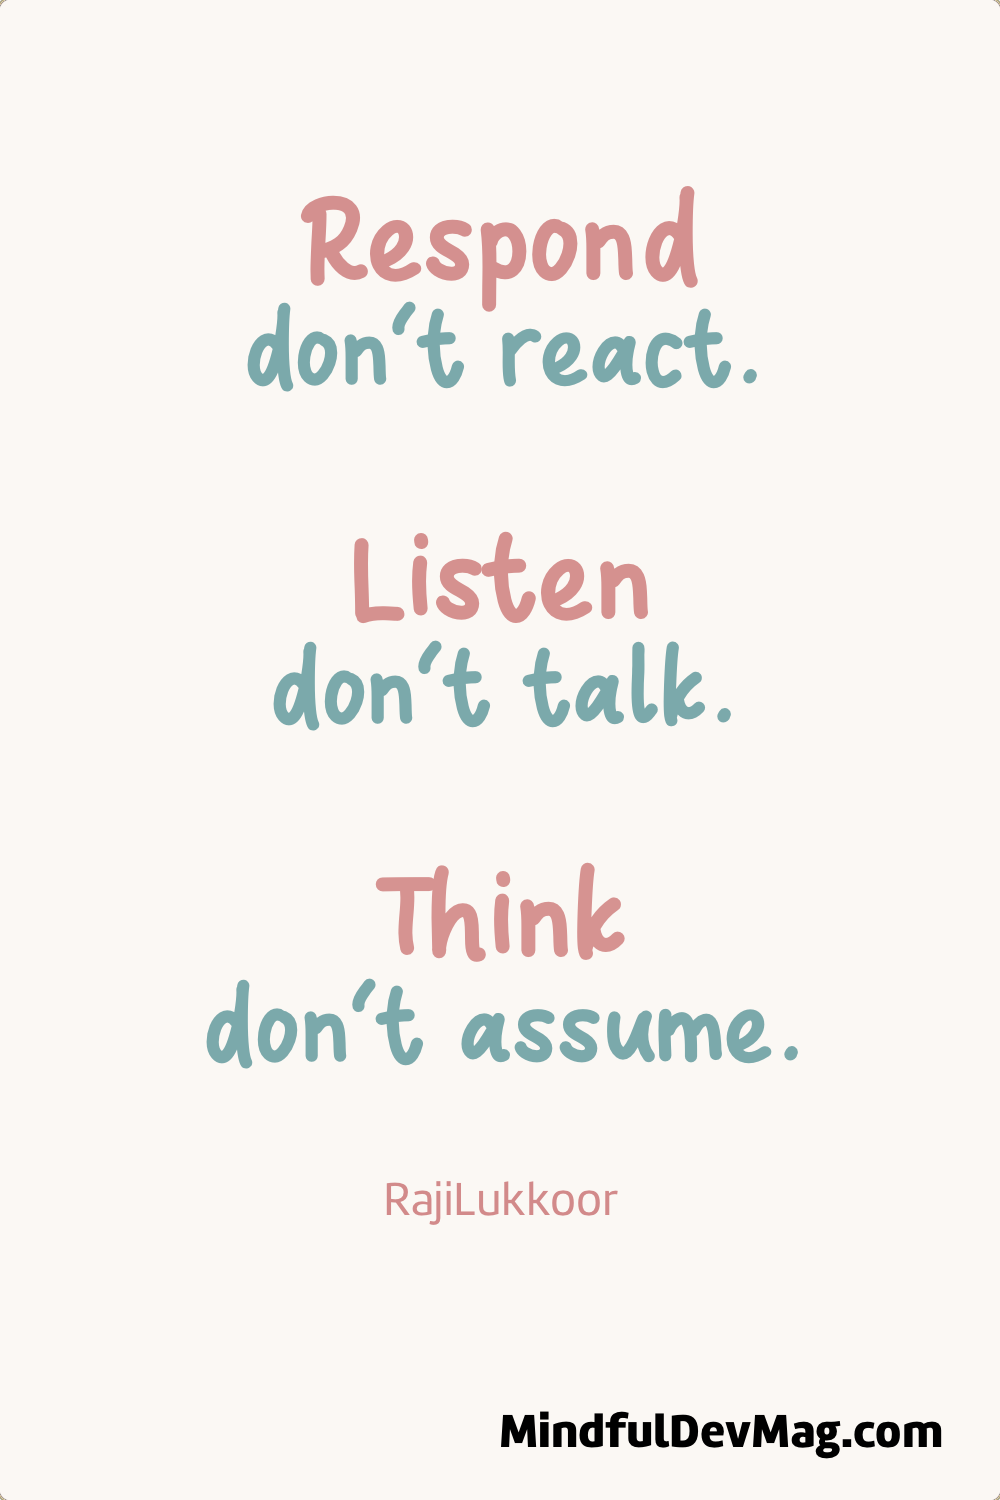 Mindful quote: Respond; don’t react. Listen; don’t talk. Think; don’t assume. - RajiLukkoor